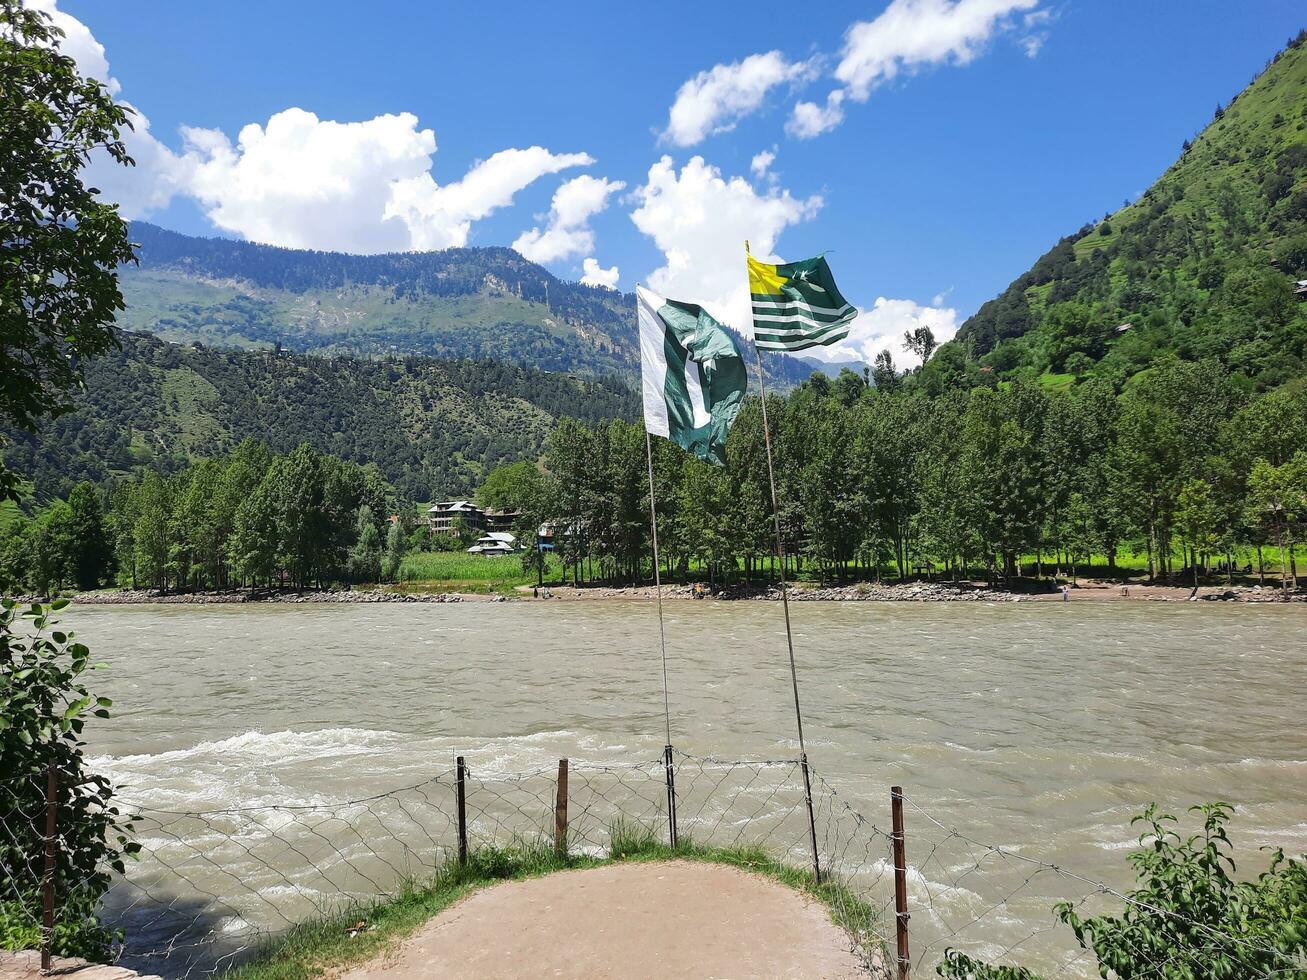 Beautiful day time view of Keran Valley, Neelam Valley, Kashmir. Green valleys, high mountains and trees are visible. photo